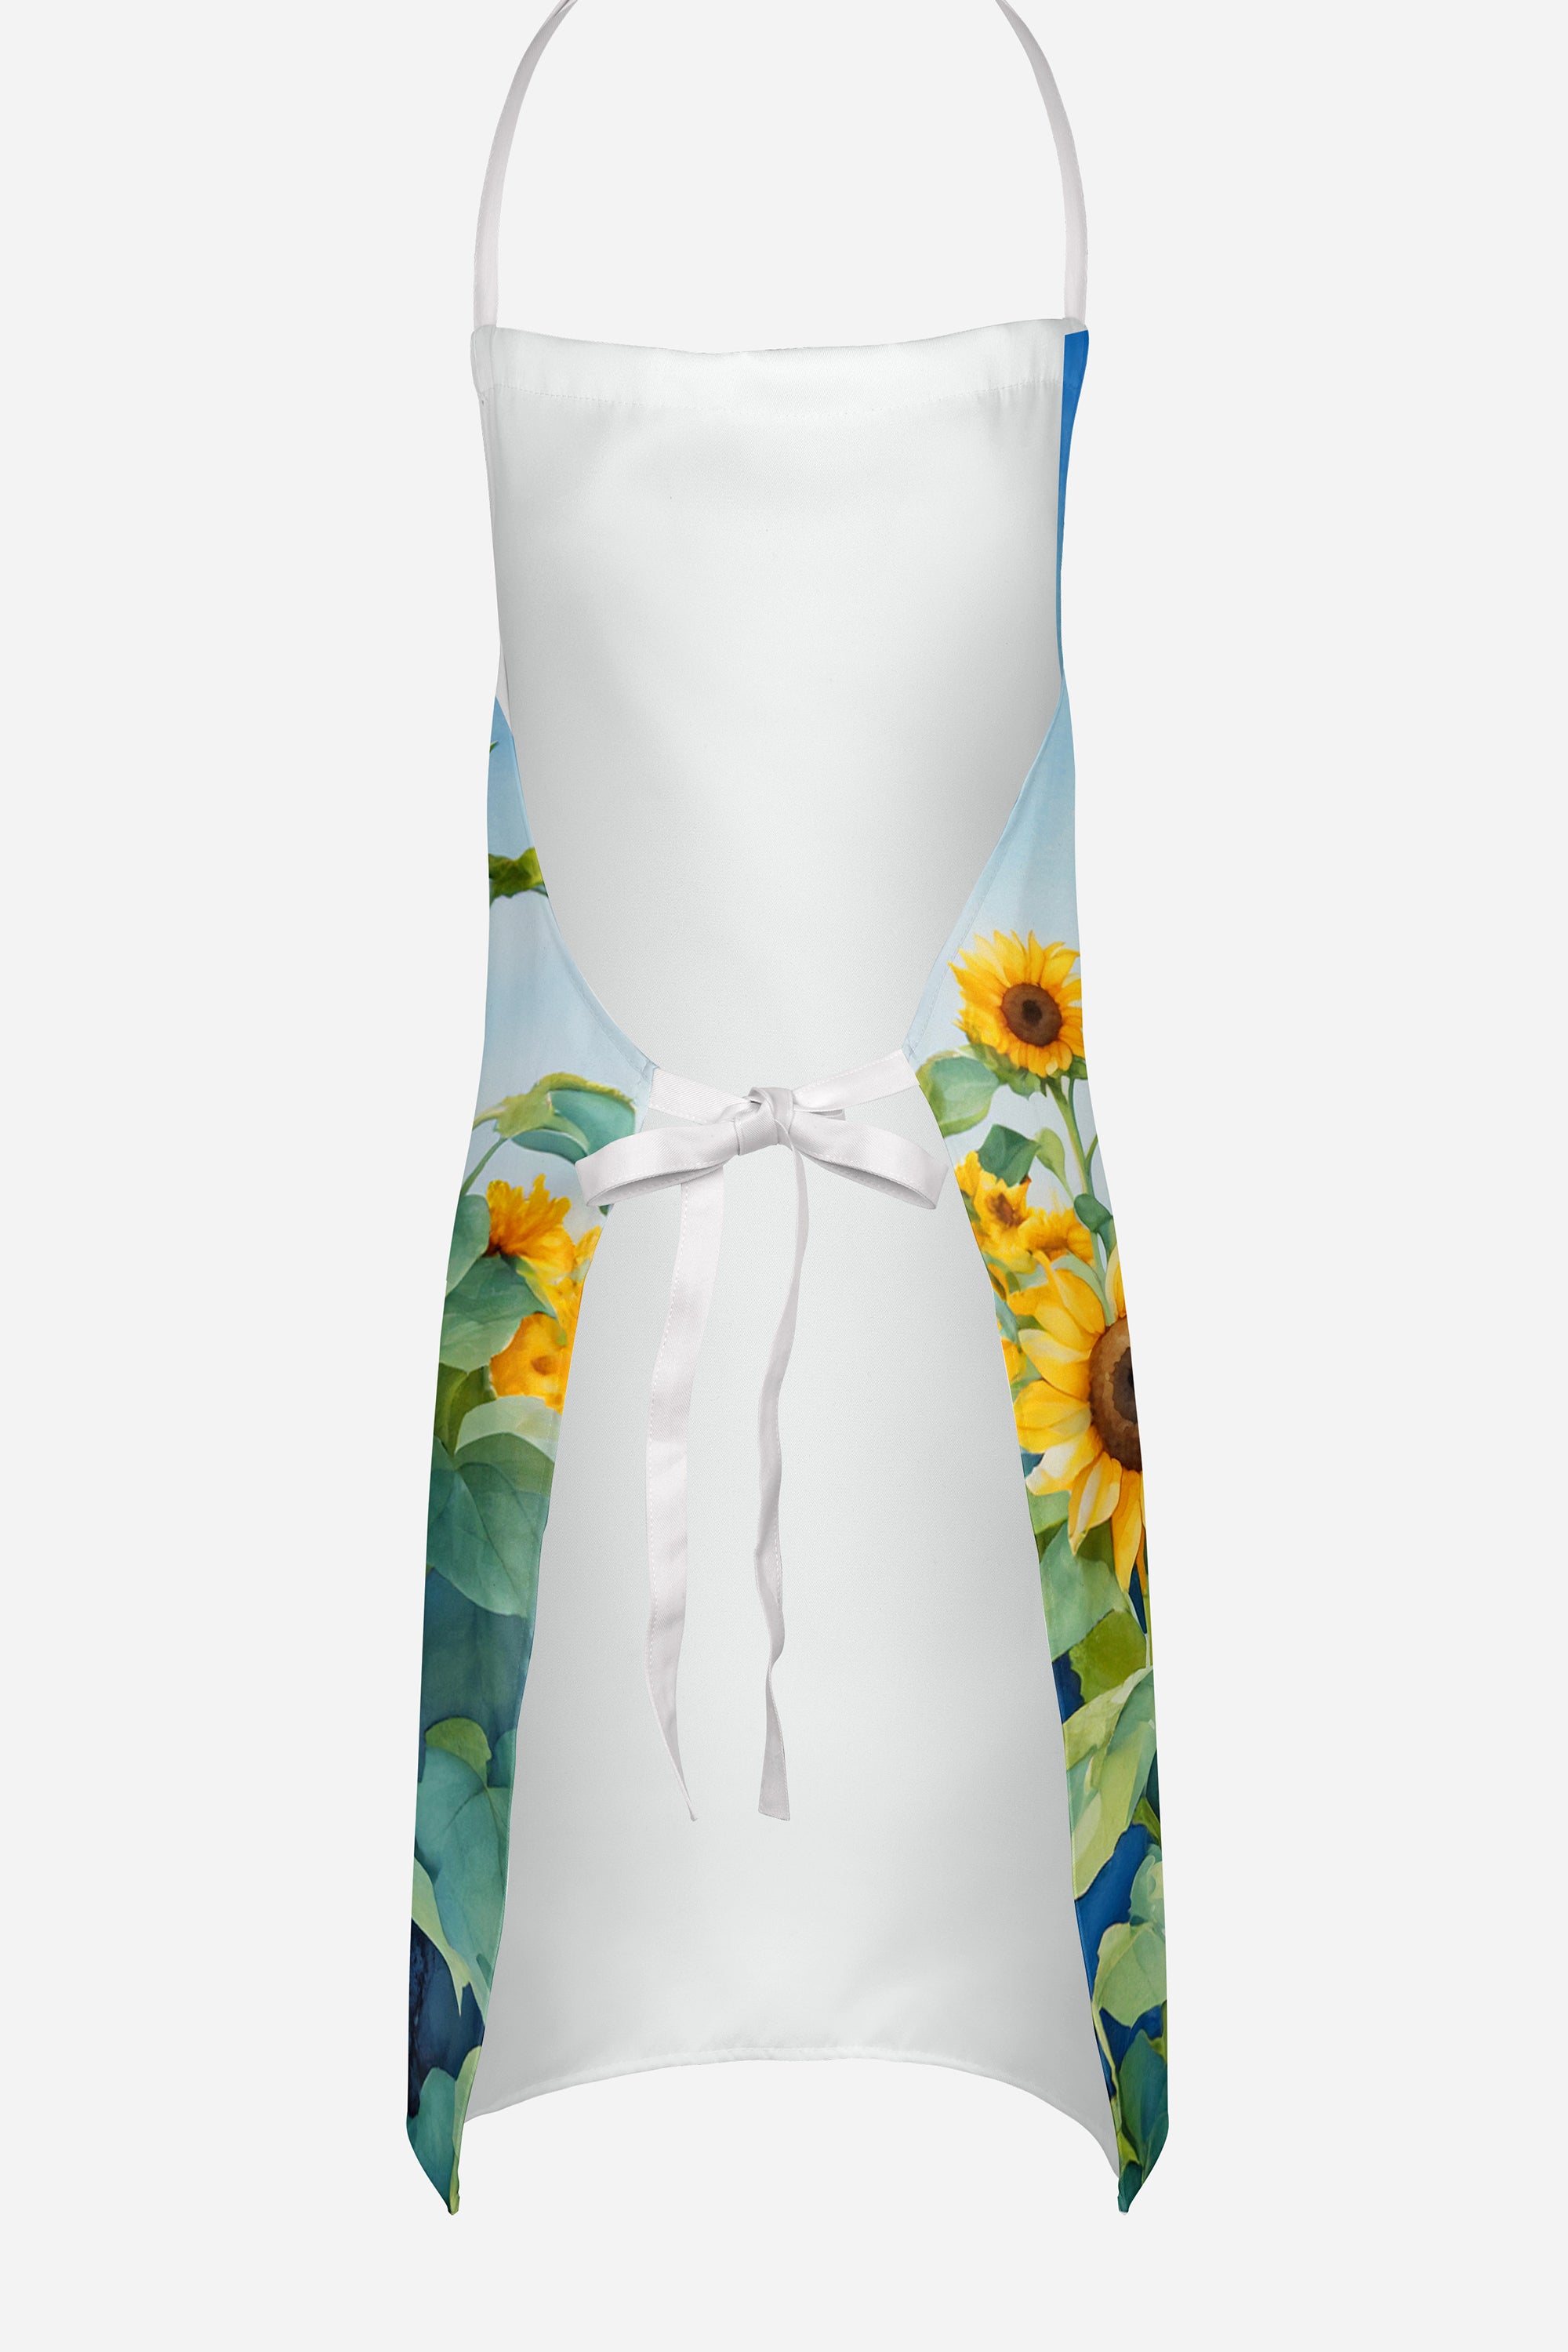 Goldendoodle in Sunflowers Apron